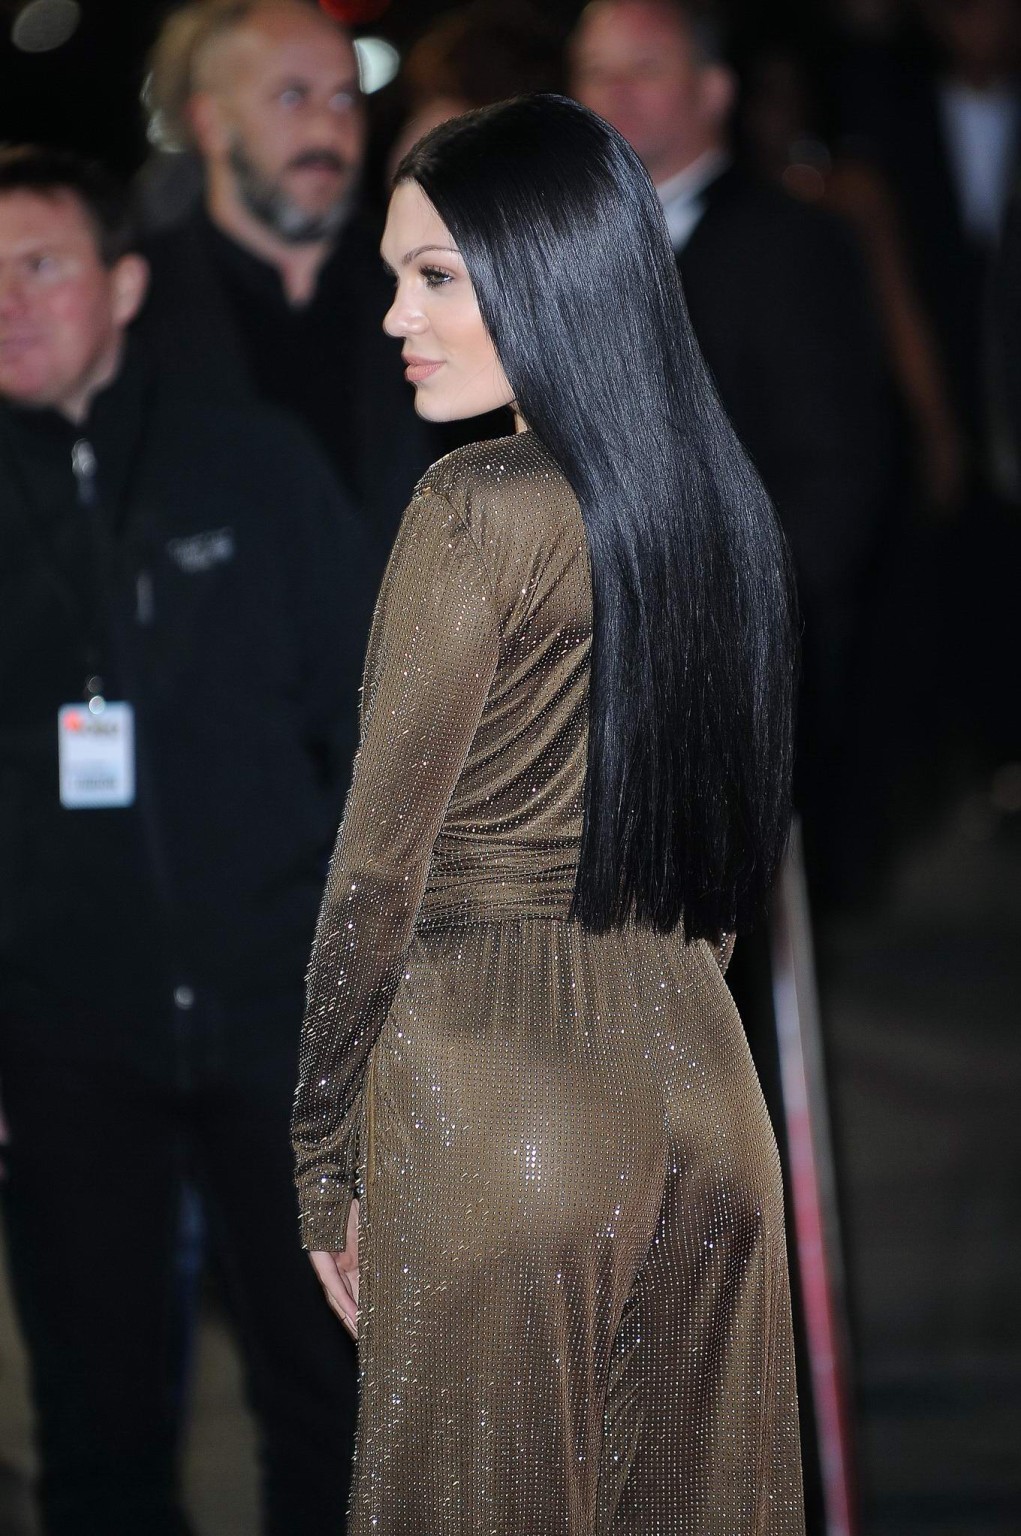 Jessie J braless wearing a wide open jumpsuit at MOBO Awards in London #75183100